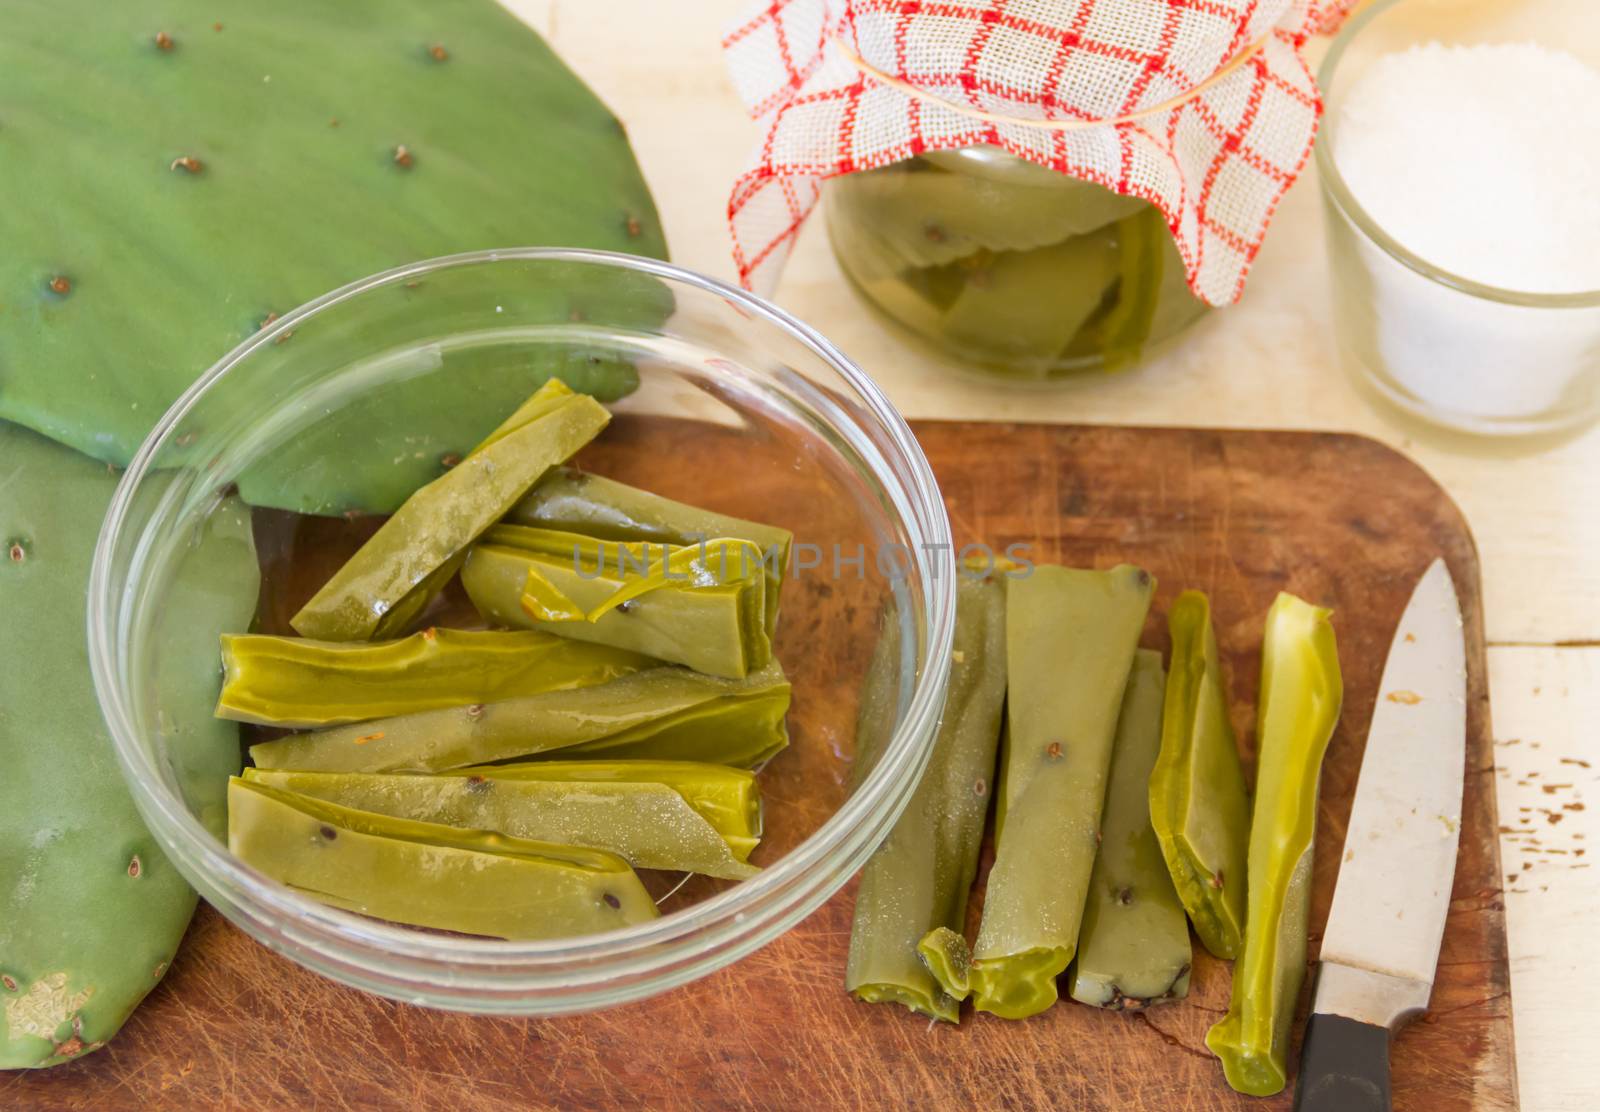 artisanal preparation of healthy food with prickly pear cactus